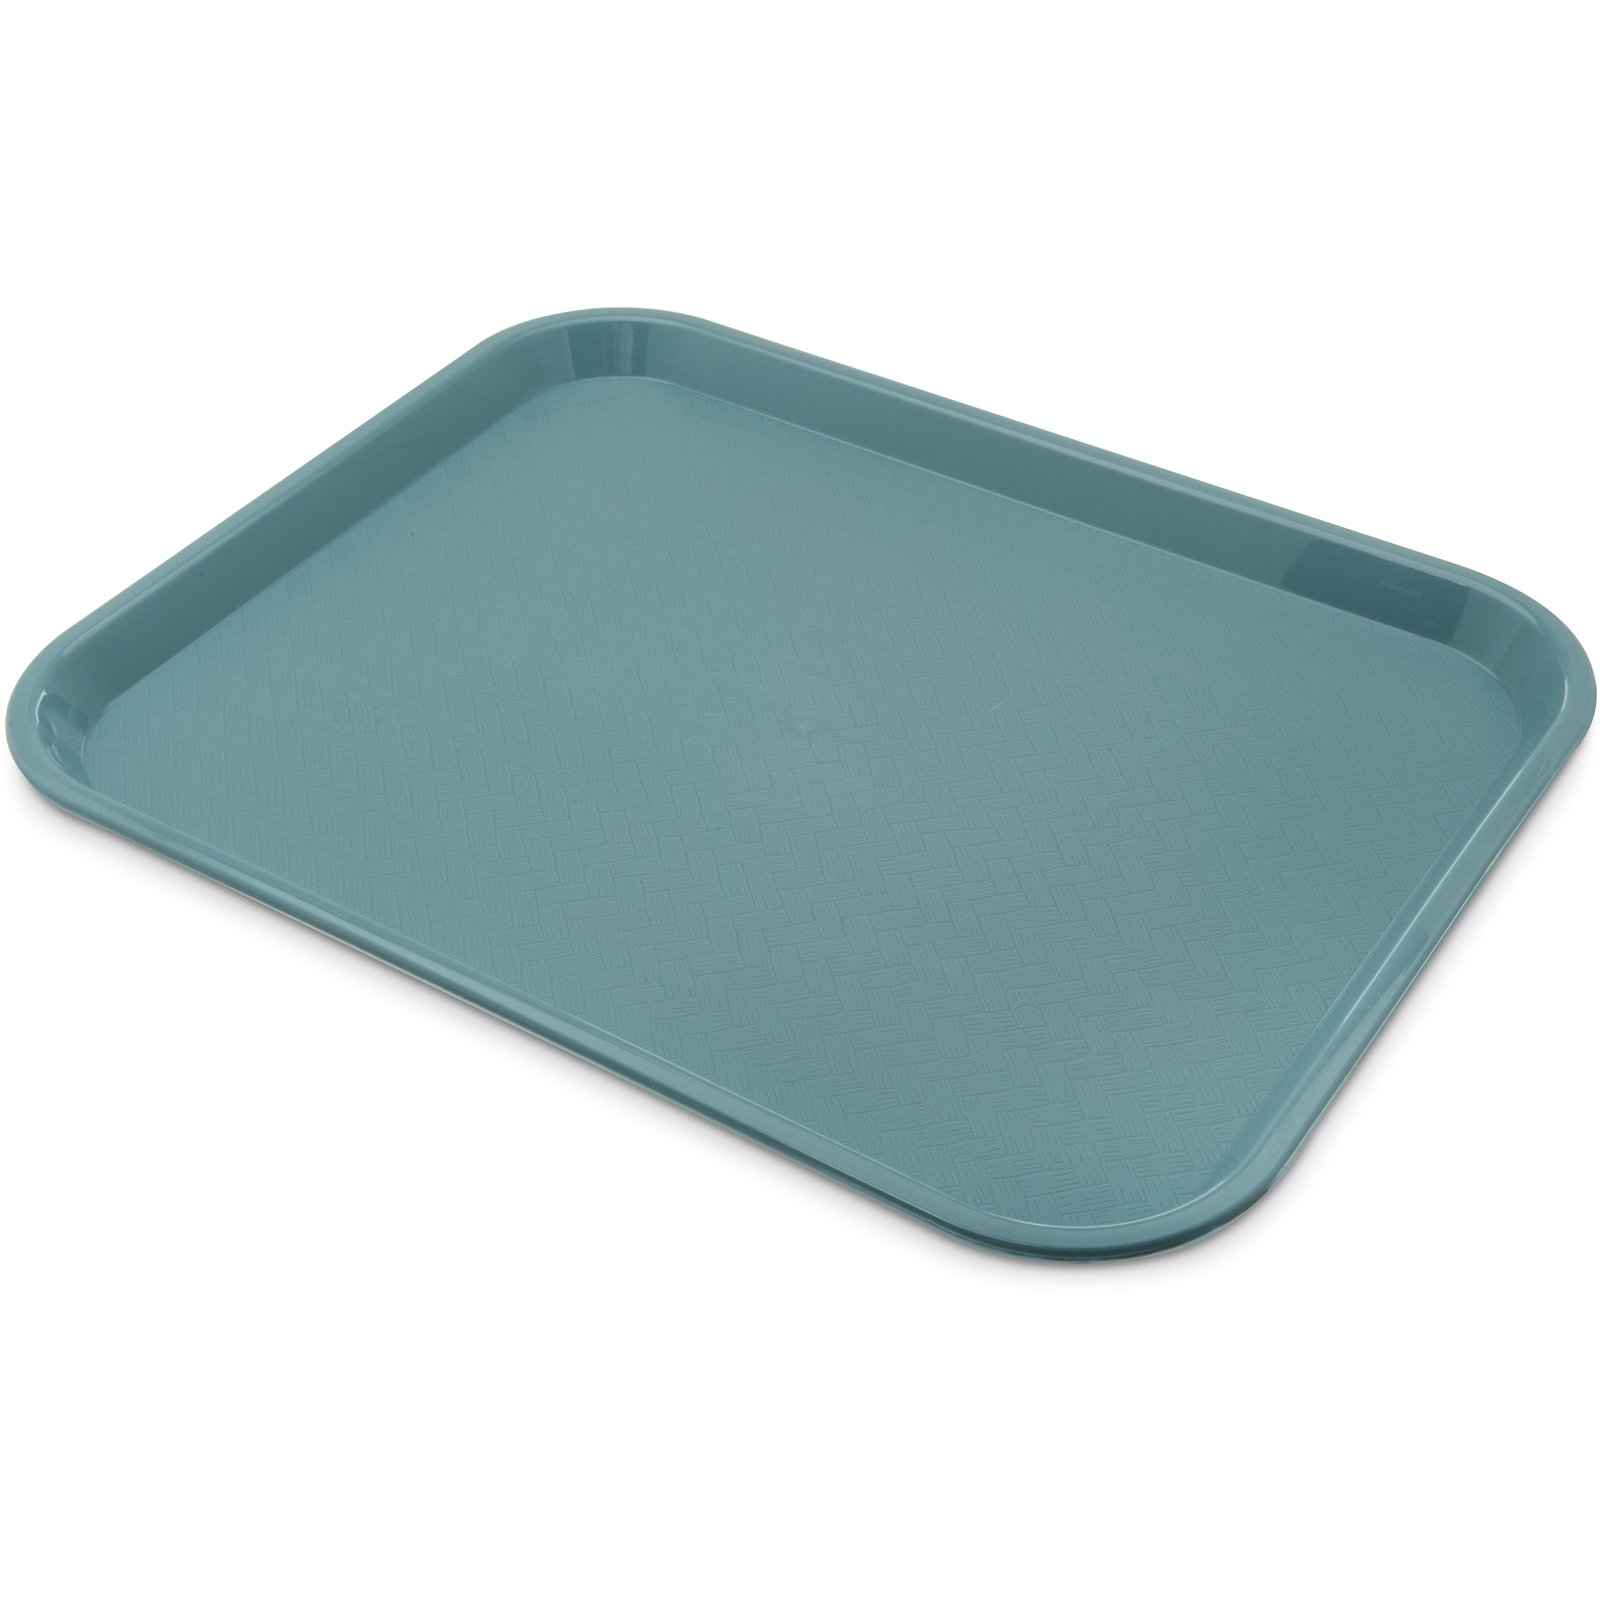 CT141859 - Cafe® Fast Food Cafeteria Tray 14 x 18 - Slate Blue